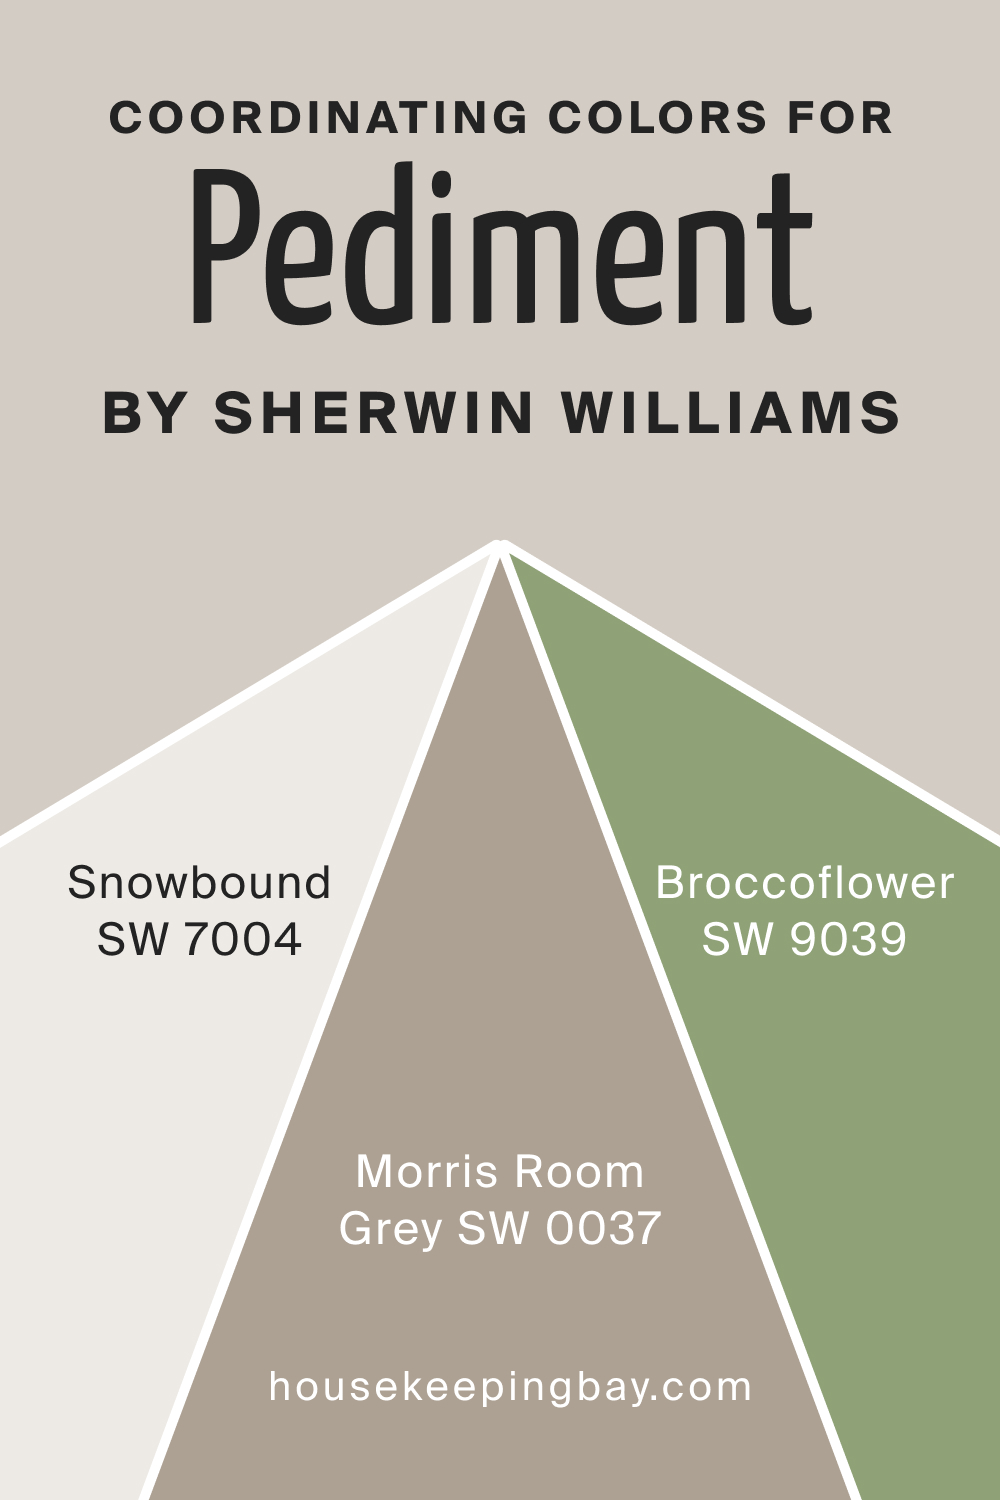 oordinating Colors for Pediment SW 7634 by Sherwin Williams